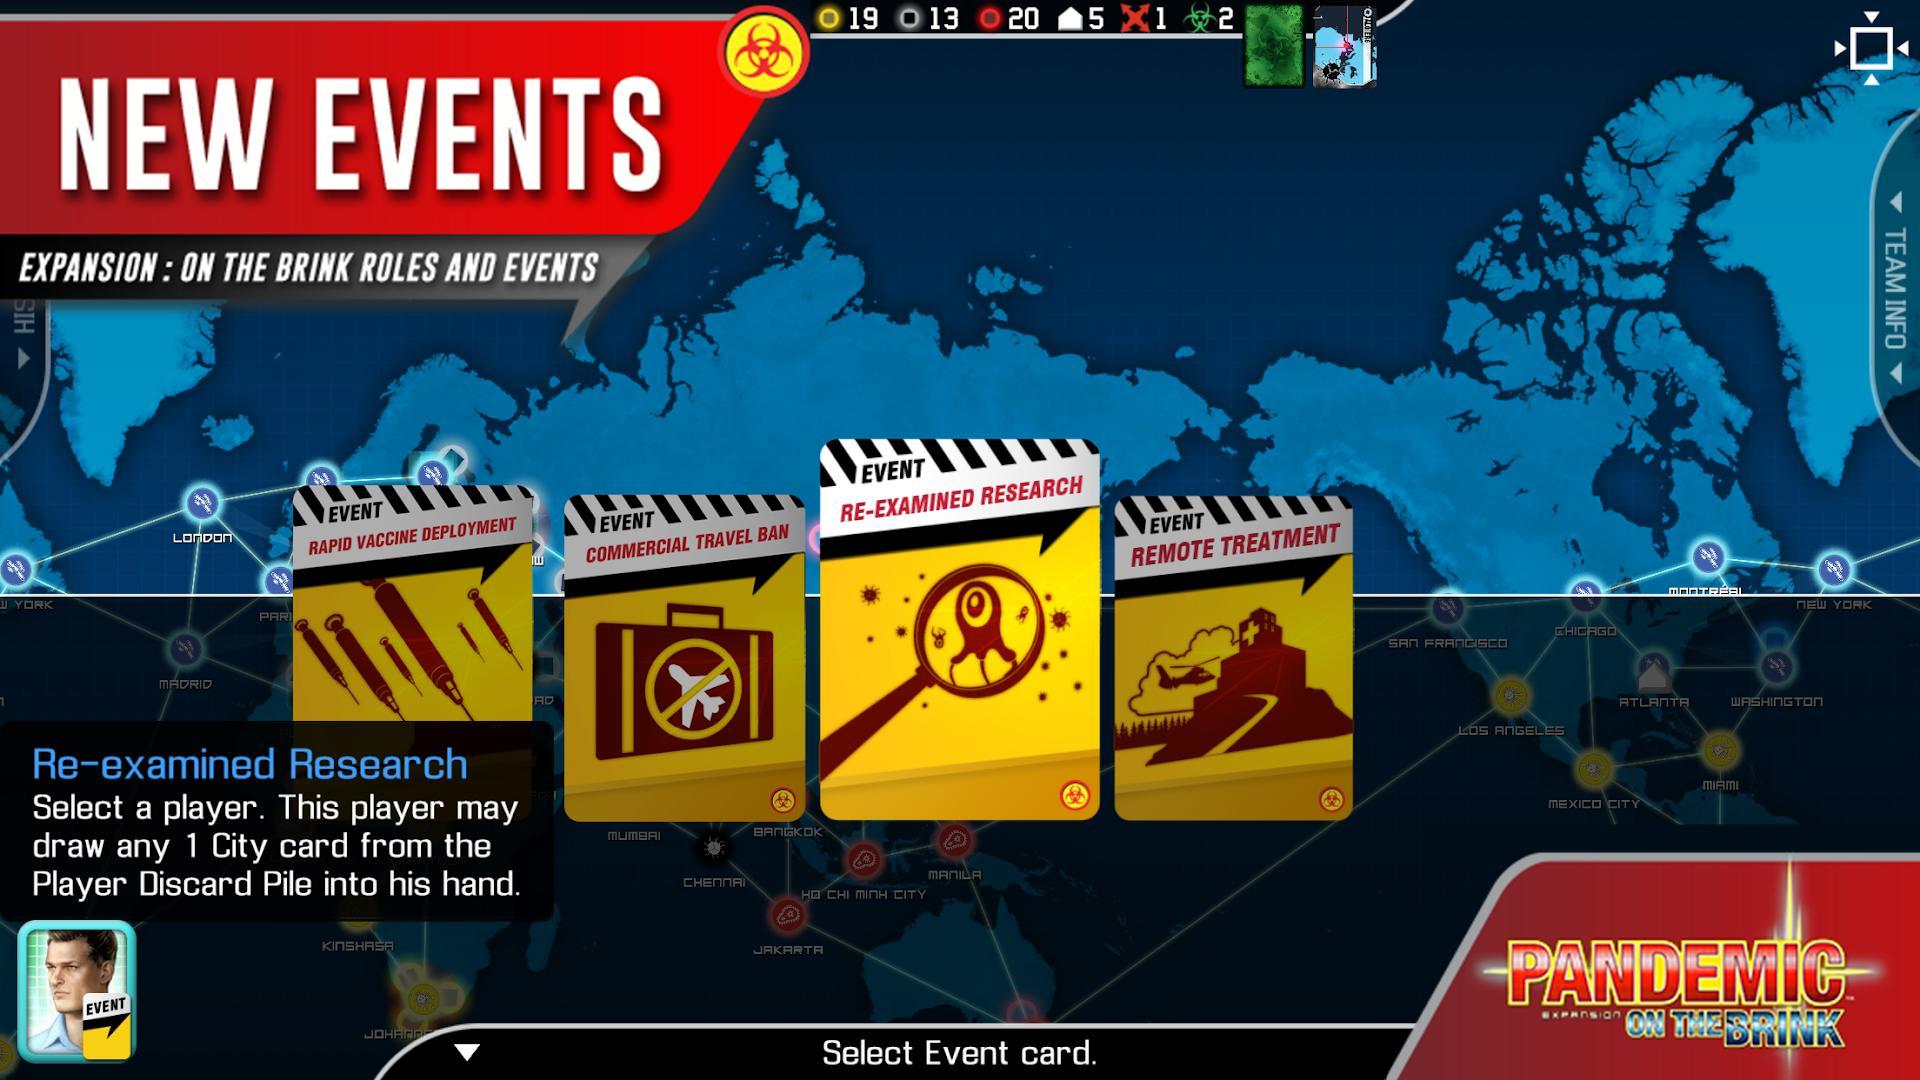 Pandemic: The Board Game Android App in the Google Play Store